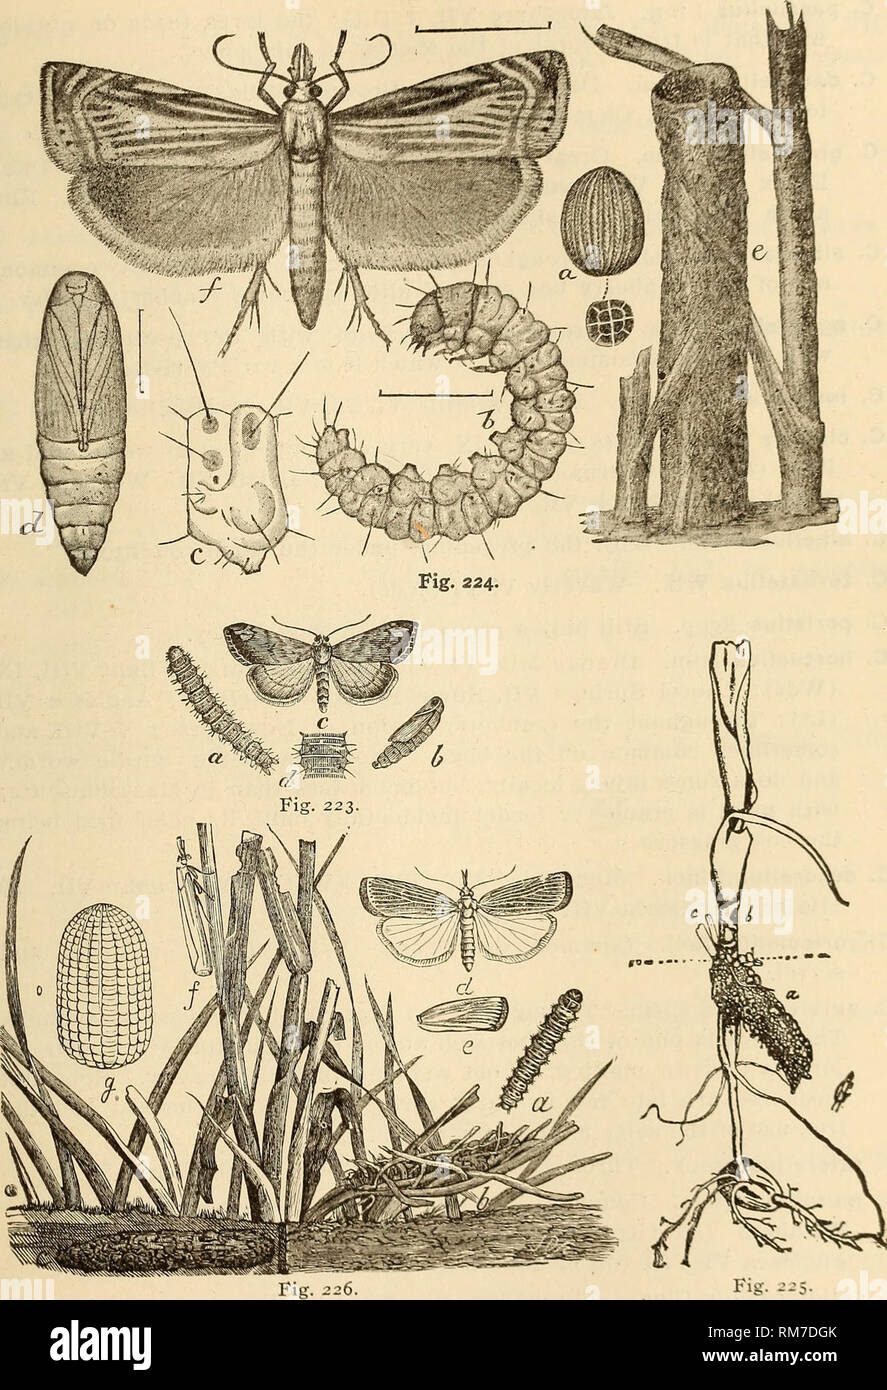 . Annual report, including a report of the insects of New Jersey, 1909. THE INSECTS OF NEW JERSEY. 529. Fig. 223.—Evergestis rimosalis, allied to E. stramtnalis: a, larva; b, pupa: c. adult. Fig. 224.—Cranberry girdle-worn, Crambus hortuellus: a, egg; b, larva; c. a single seg- ment; d, pupa; e, tube made by larva; f. adult, all much enlarged. Fig. 225.—Corn-root web worm at work. Fig. 226.—Root web worm, Crambus i-uh-k'nscllus: a. larva; /'. over- c&quot;. undor-k-round tube and cocoon; d, c, f, moths, wings spread and at rest; ^ egg very greatly enarged. 34 IN. Please note that these images Stock Photo